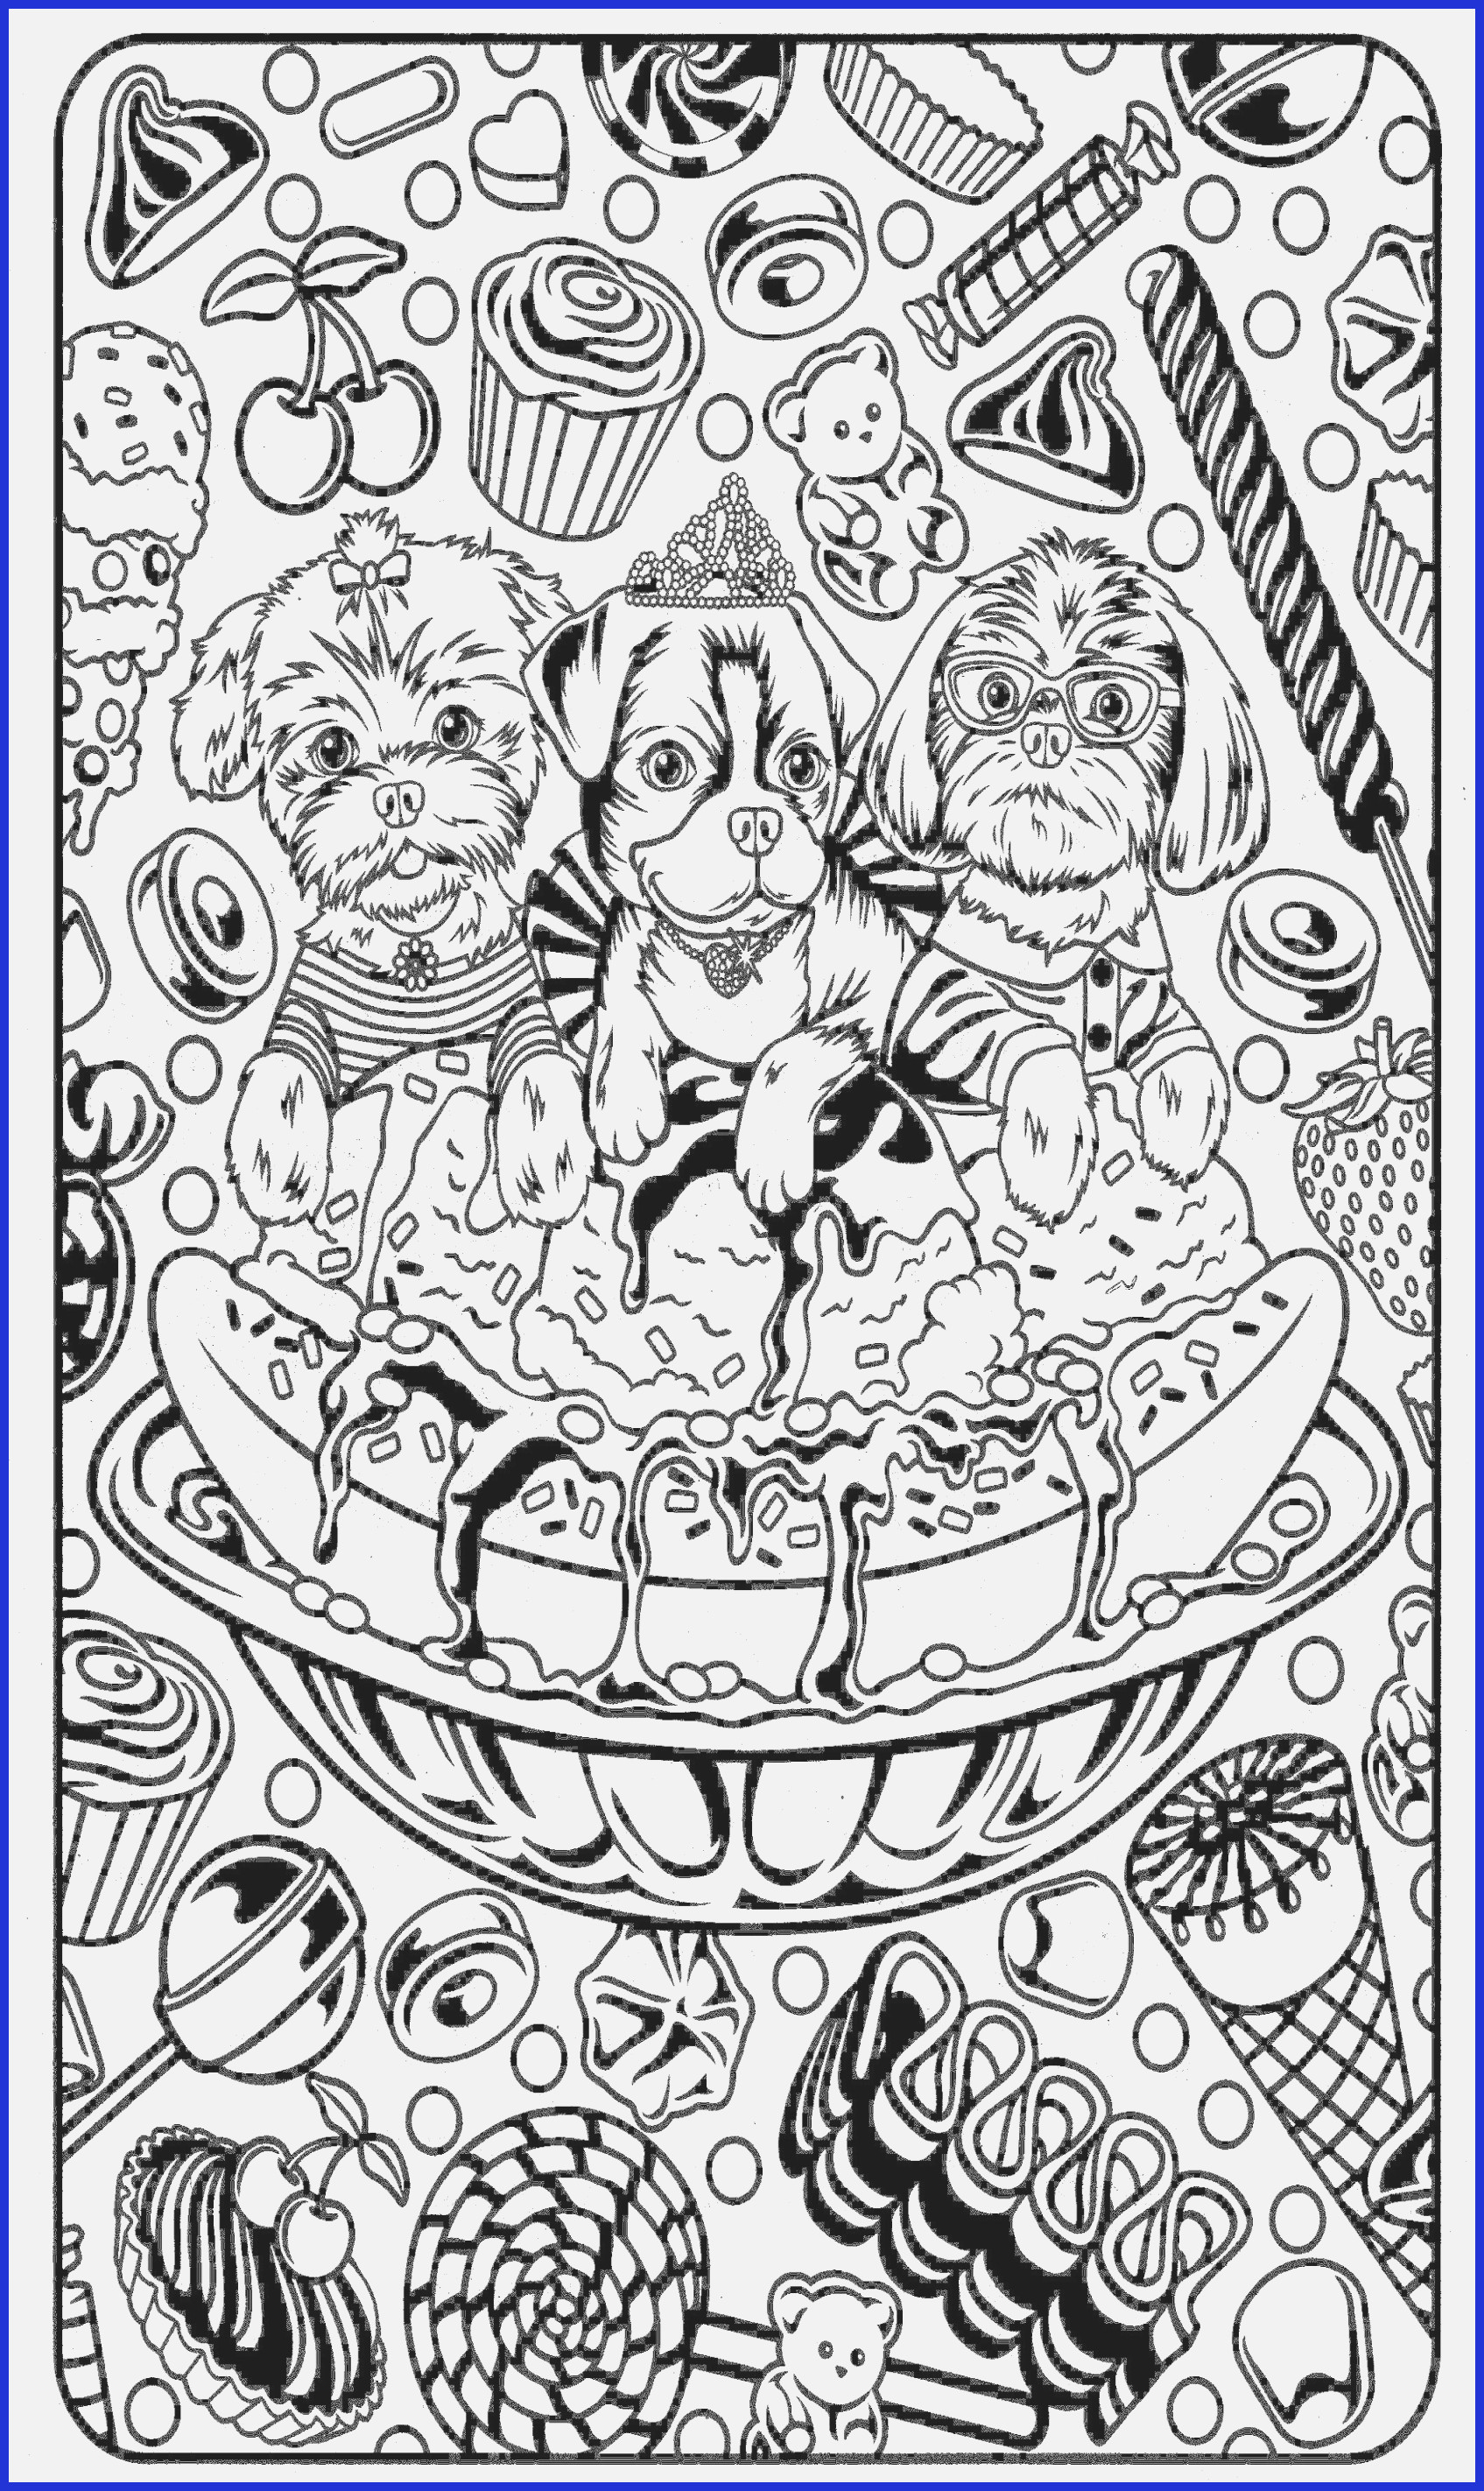 Zentangle Coloring Pages Pages De Coloriages Coloring - Mandala Coloring Pages Stress Relief , HD Wallpaper & Backgrounds